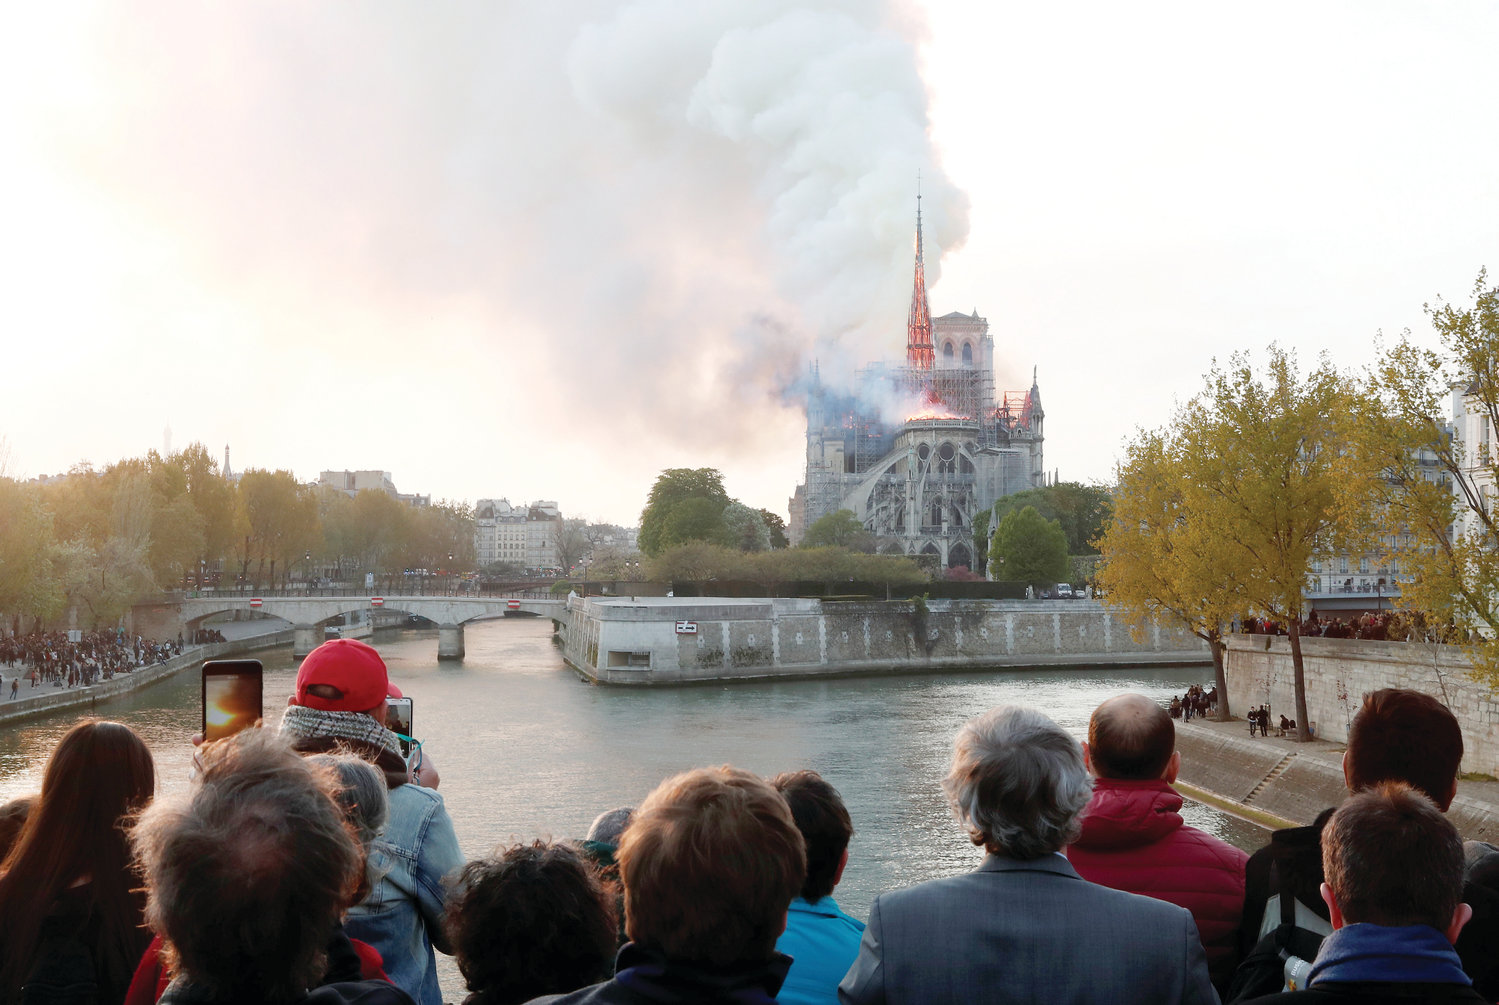 Flames and smoke billow from the Notre Dame Cathedral after a fire broke out in Paris April 15, 2019. Officials said the cause was not clear, but that the fire could be linked to renovation work.